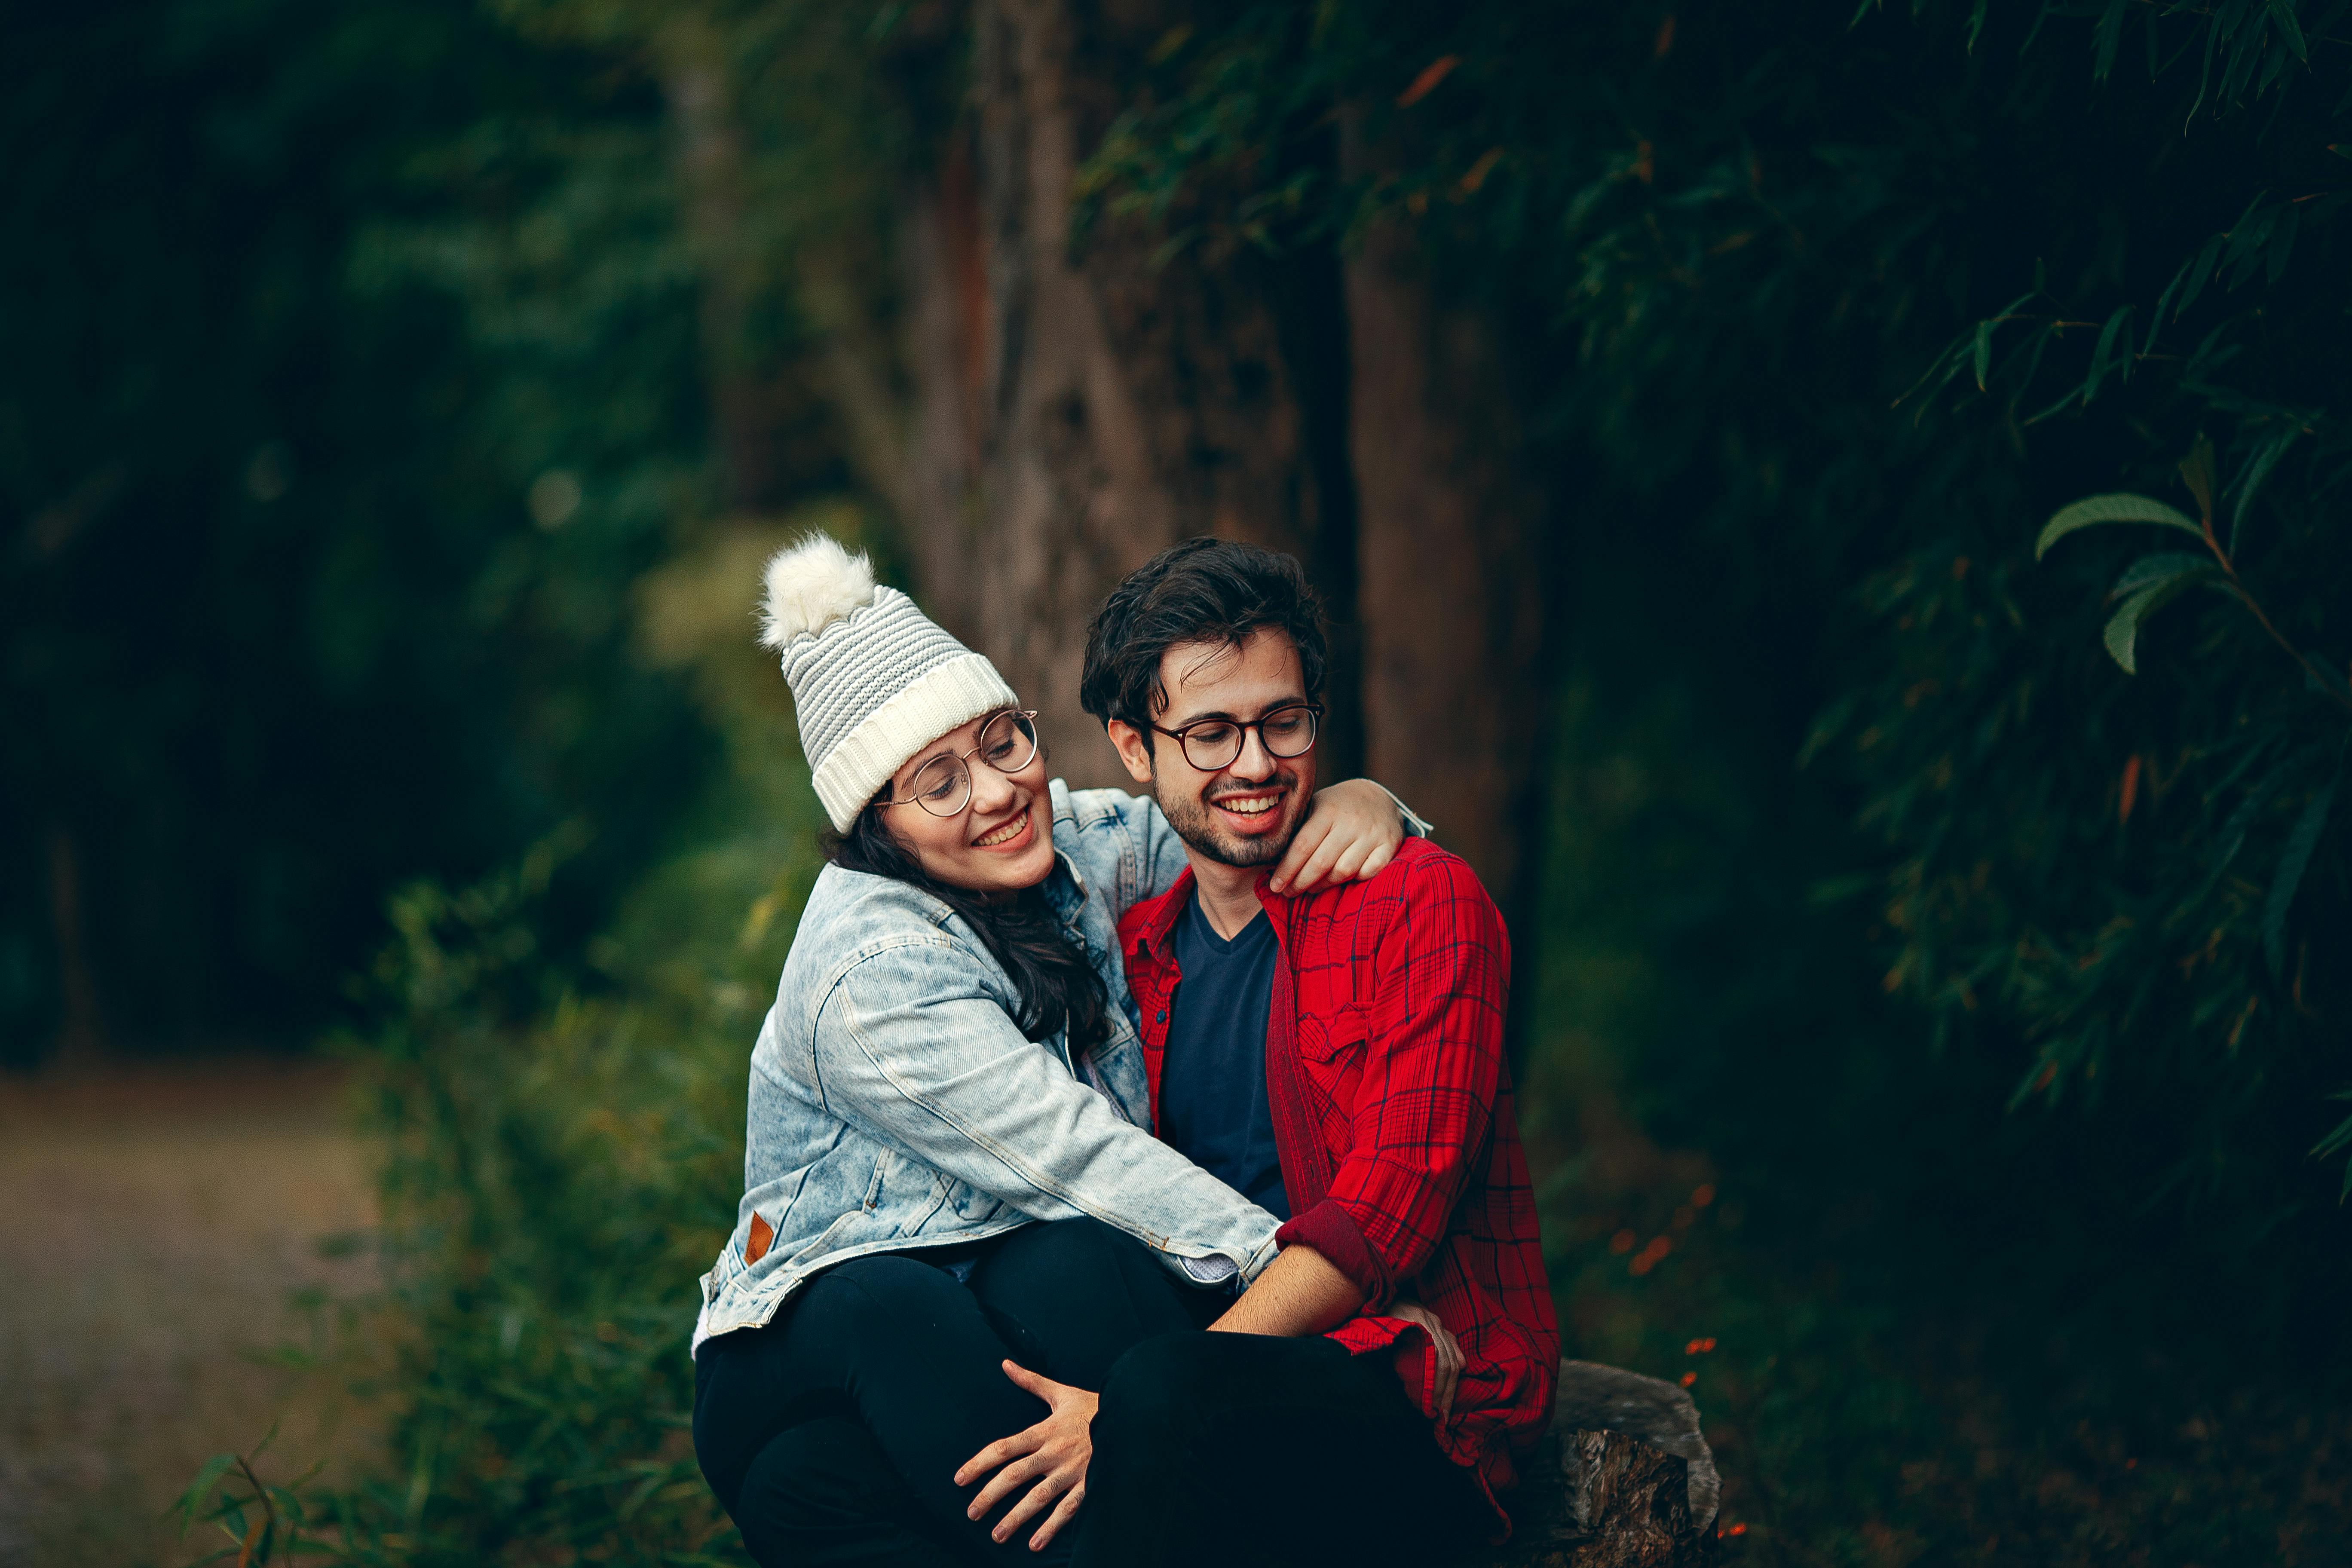 The Hot Couple Pose Together For The Photo. Stock Photo, Picture and  Royalty Free Image. Image 172484494.